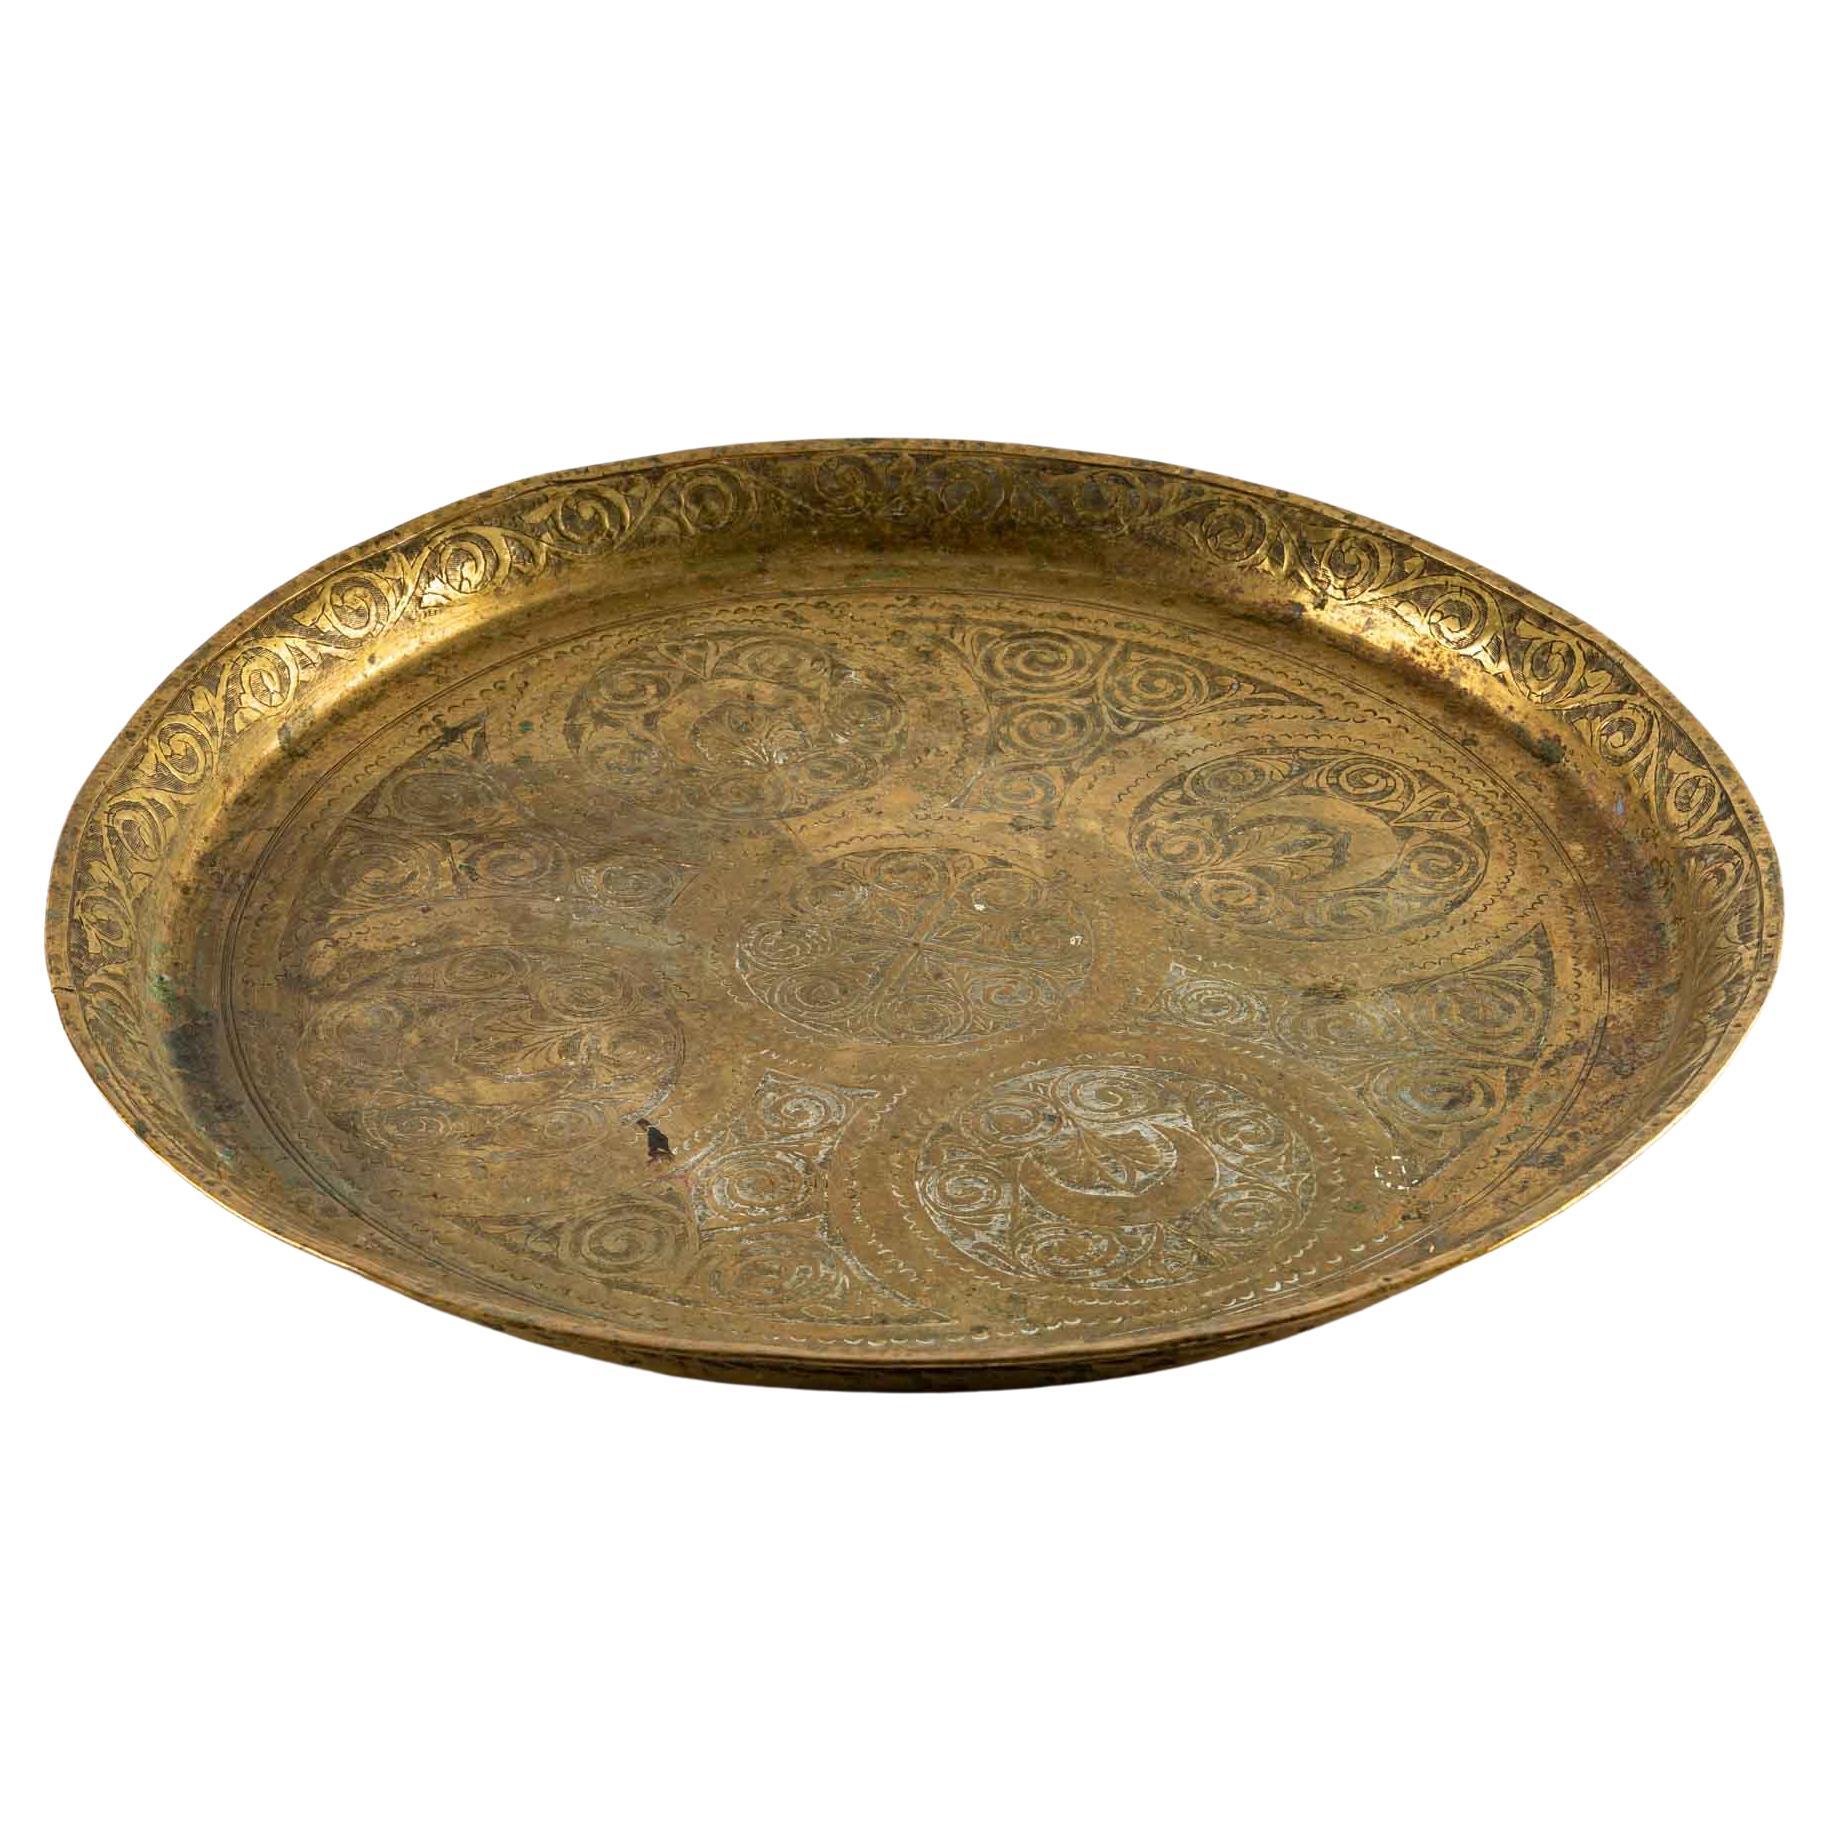 Middle Eastern plate Goddess India palace Vintage copper Brass plate Wall picture plate